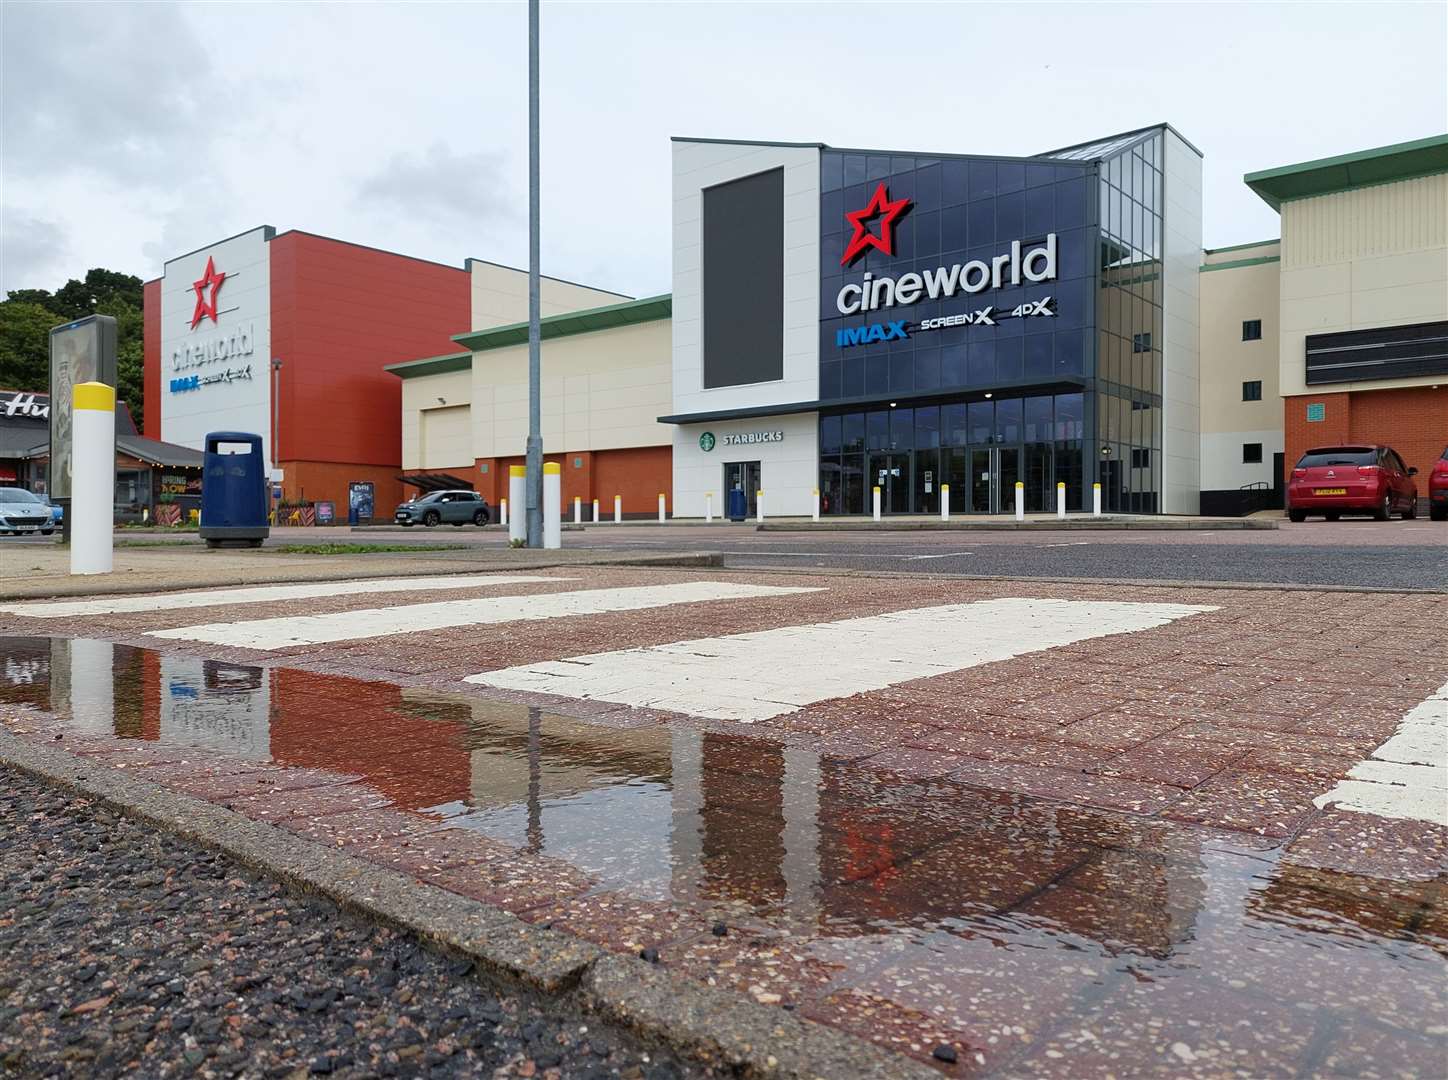 Cineworld in Ashford was forced to close after heavy rain